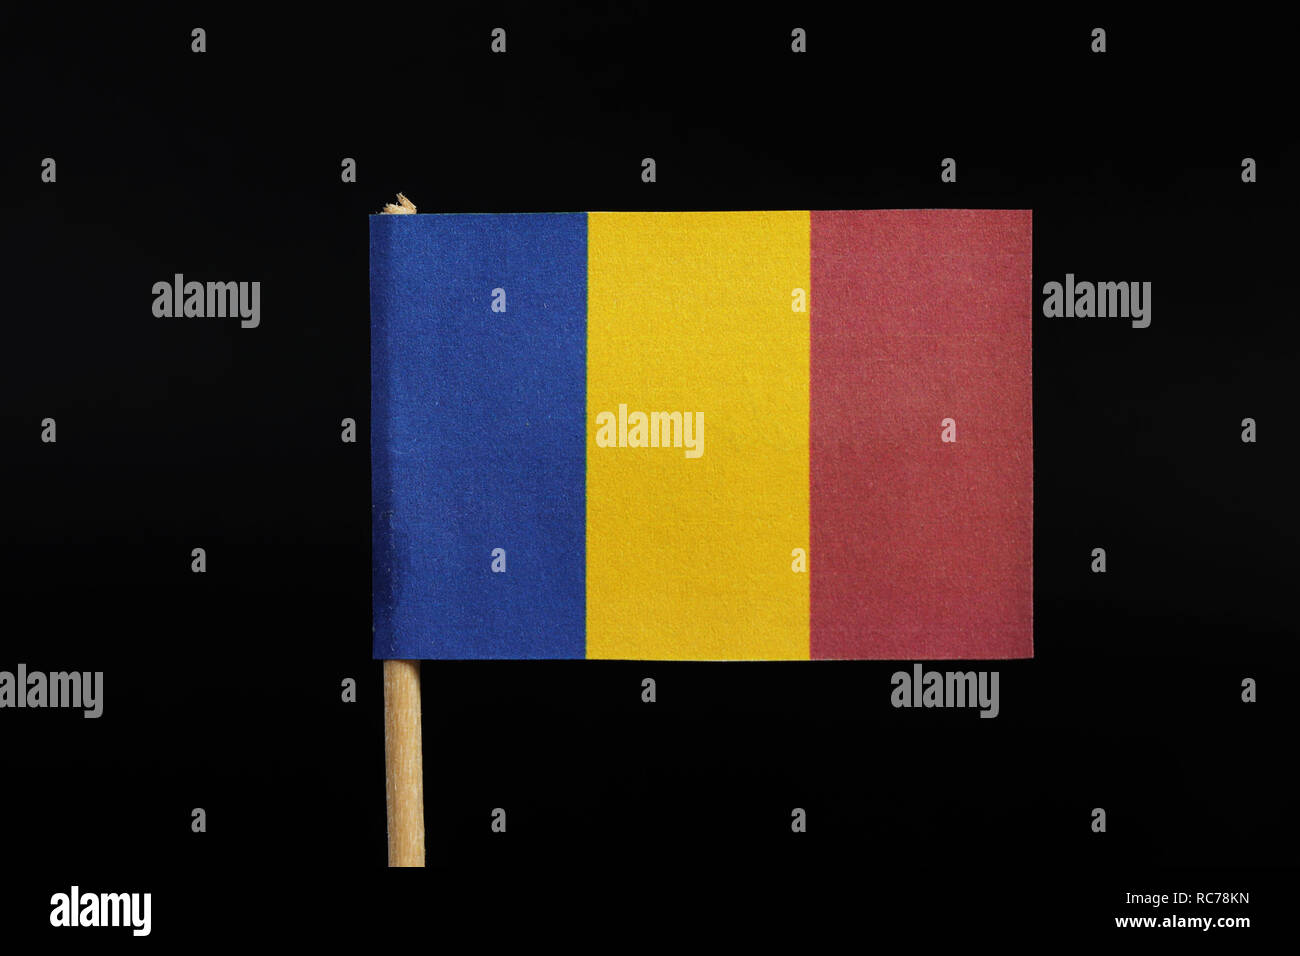 A national flag of Romania on toothpick on black background. A vertical tricolor of blue, yellow, and red. Stock Photo